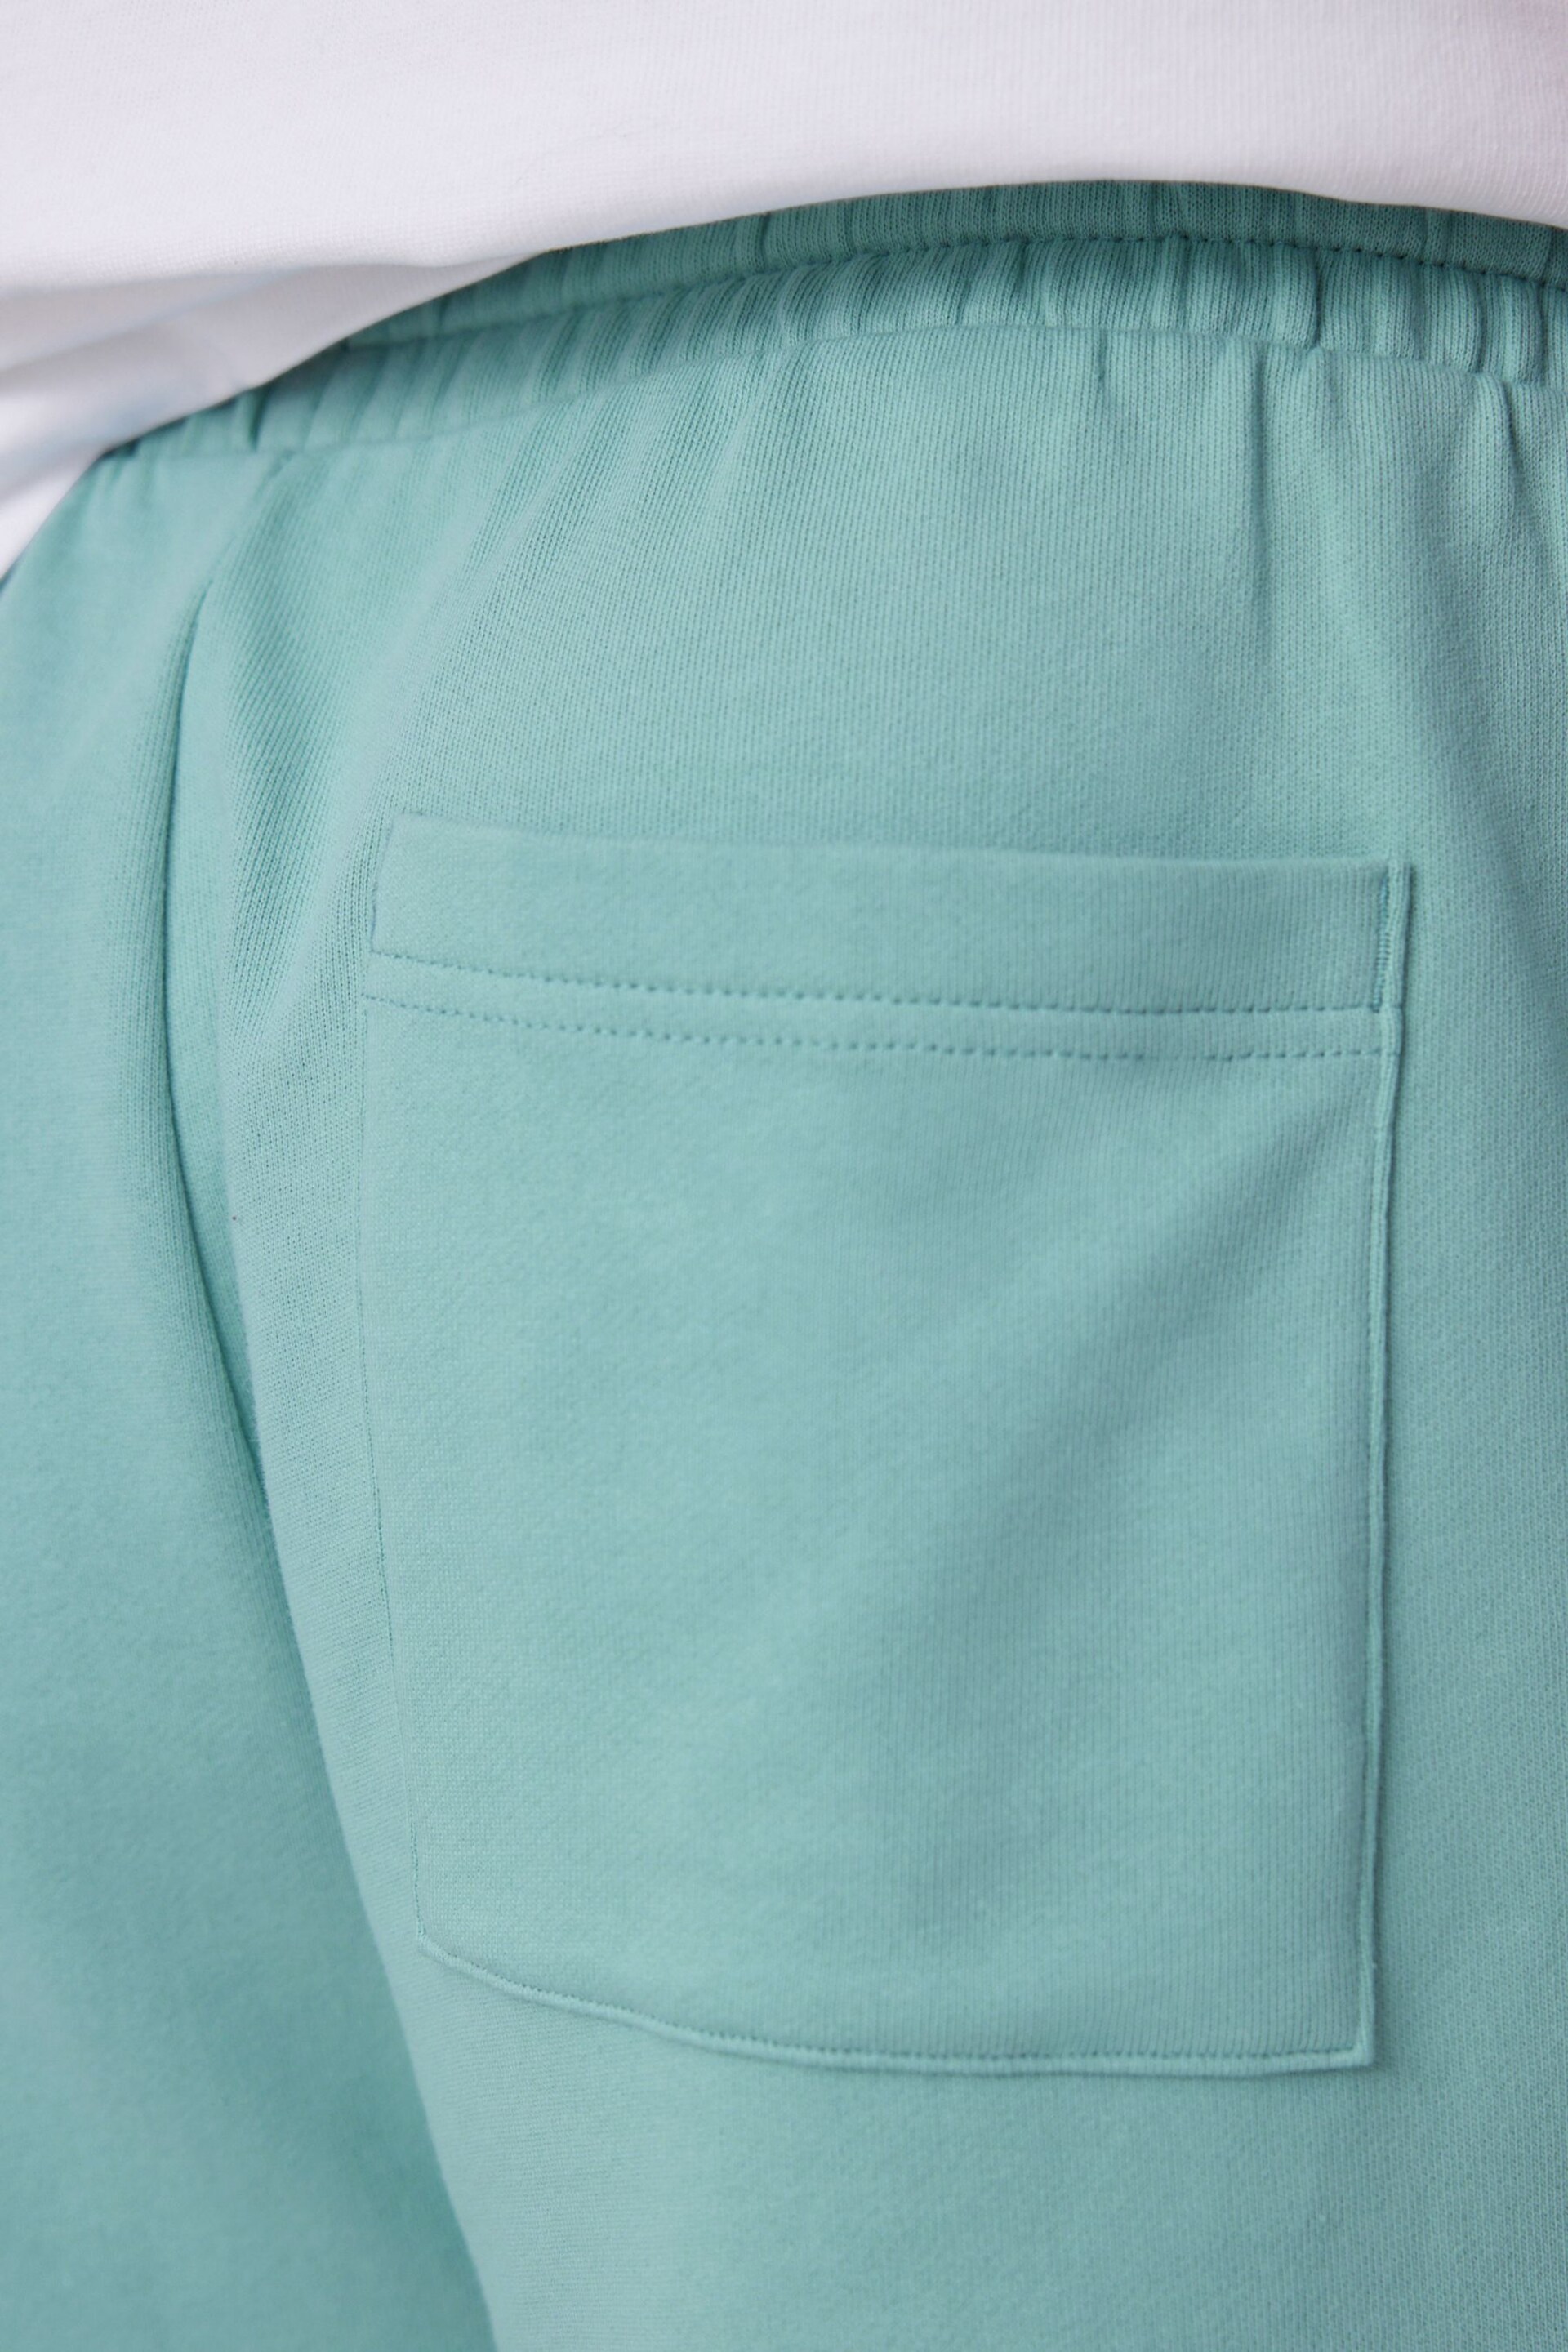 Blue/Green Lightweight Jogger Shorts 2 Pack - Image 7 of 14